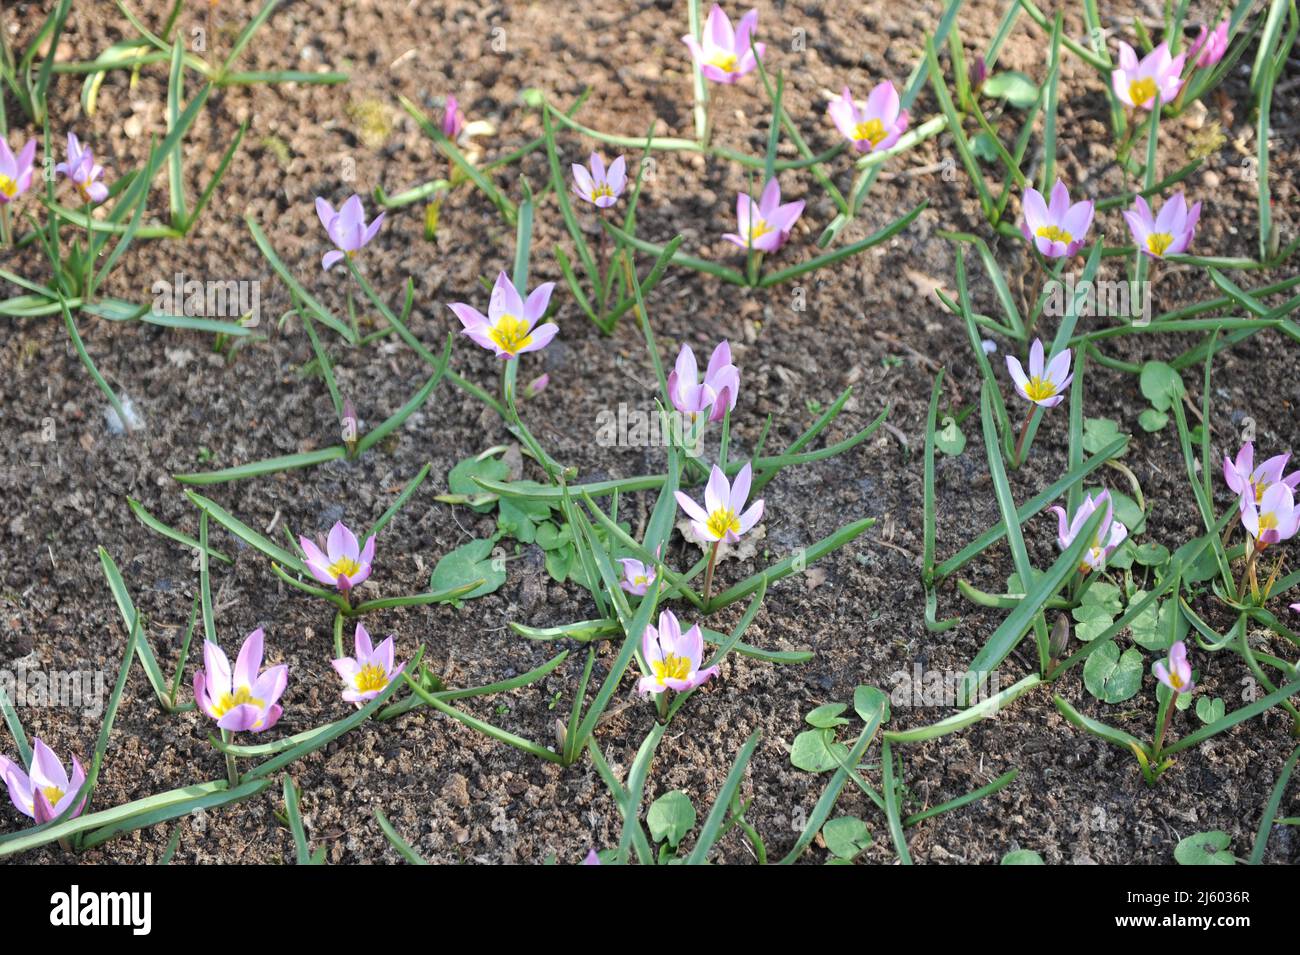 Violet-pink Miscellaneous low-growing tulips (Tulipa humilis) Violacea bloom in a garden in March Stock Photo